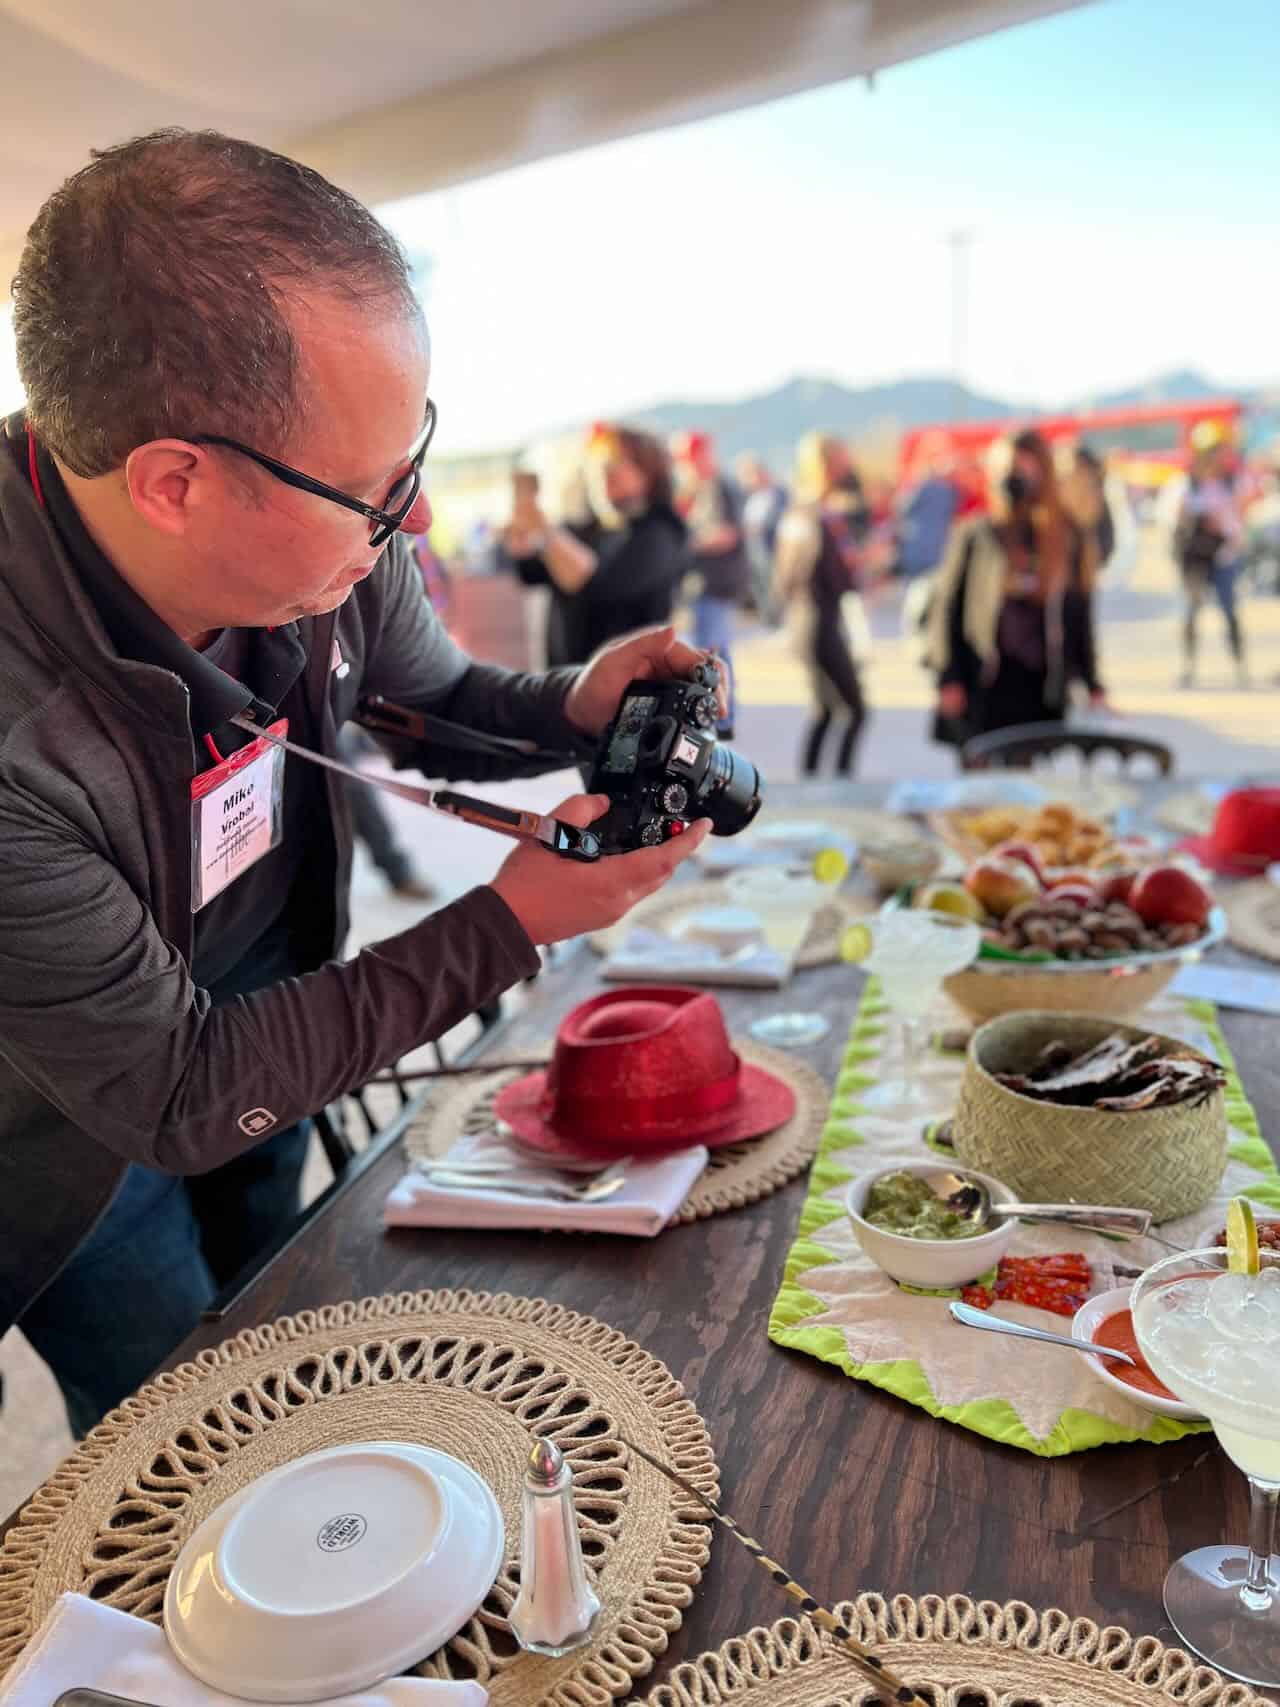 Mike Vrobel, camera in hand, over a Mexican table - courtesy of @bethsips